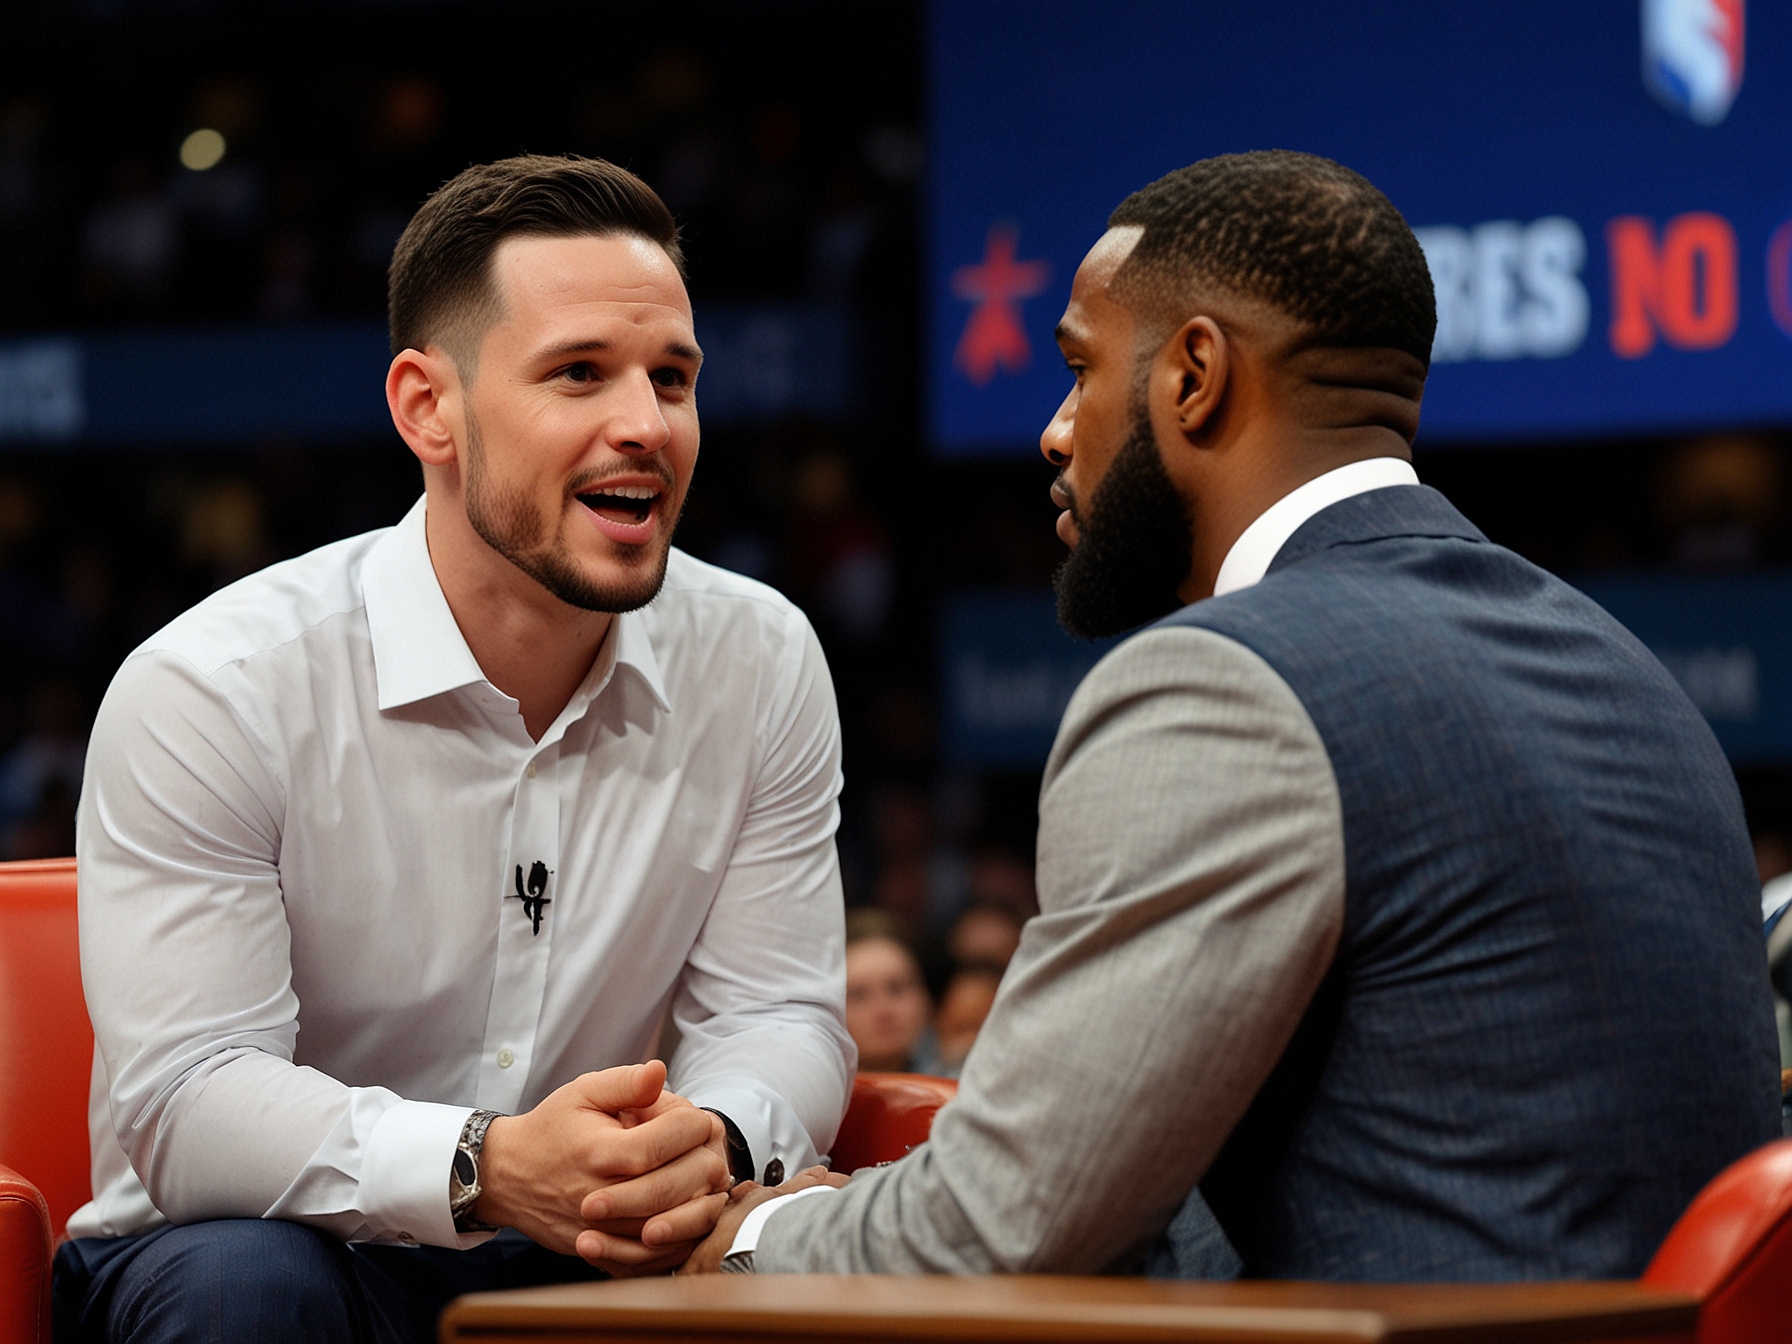 JJ Redick speaking on a sports talk show, sharing the news about LeBron James ending his podcast, highlighting the commitment athletes have to balance on-court and off-court responsibilities.